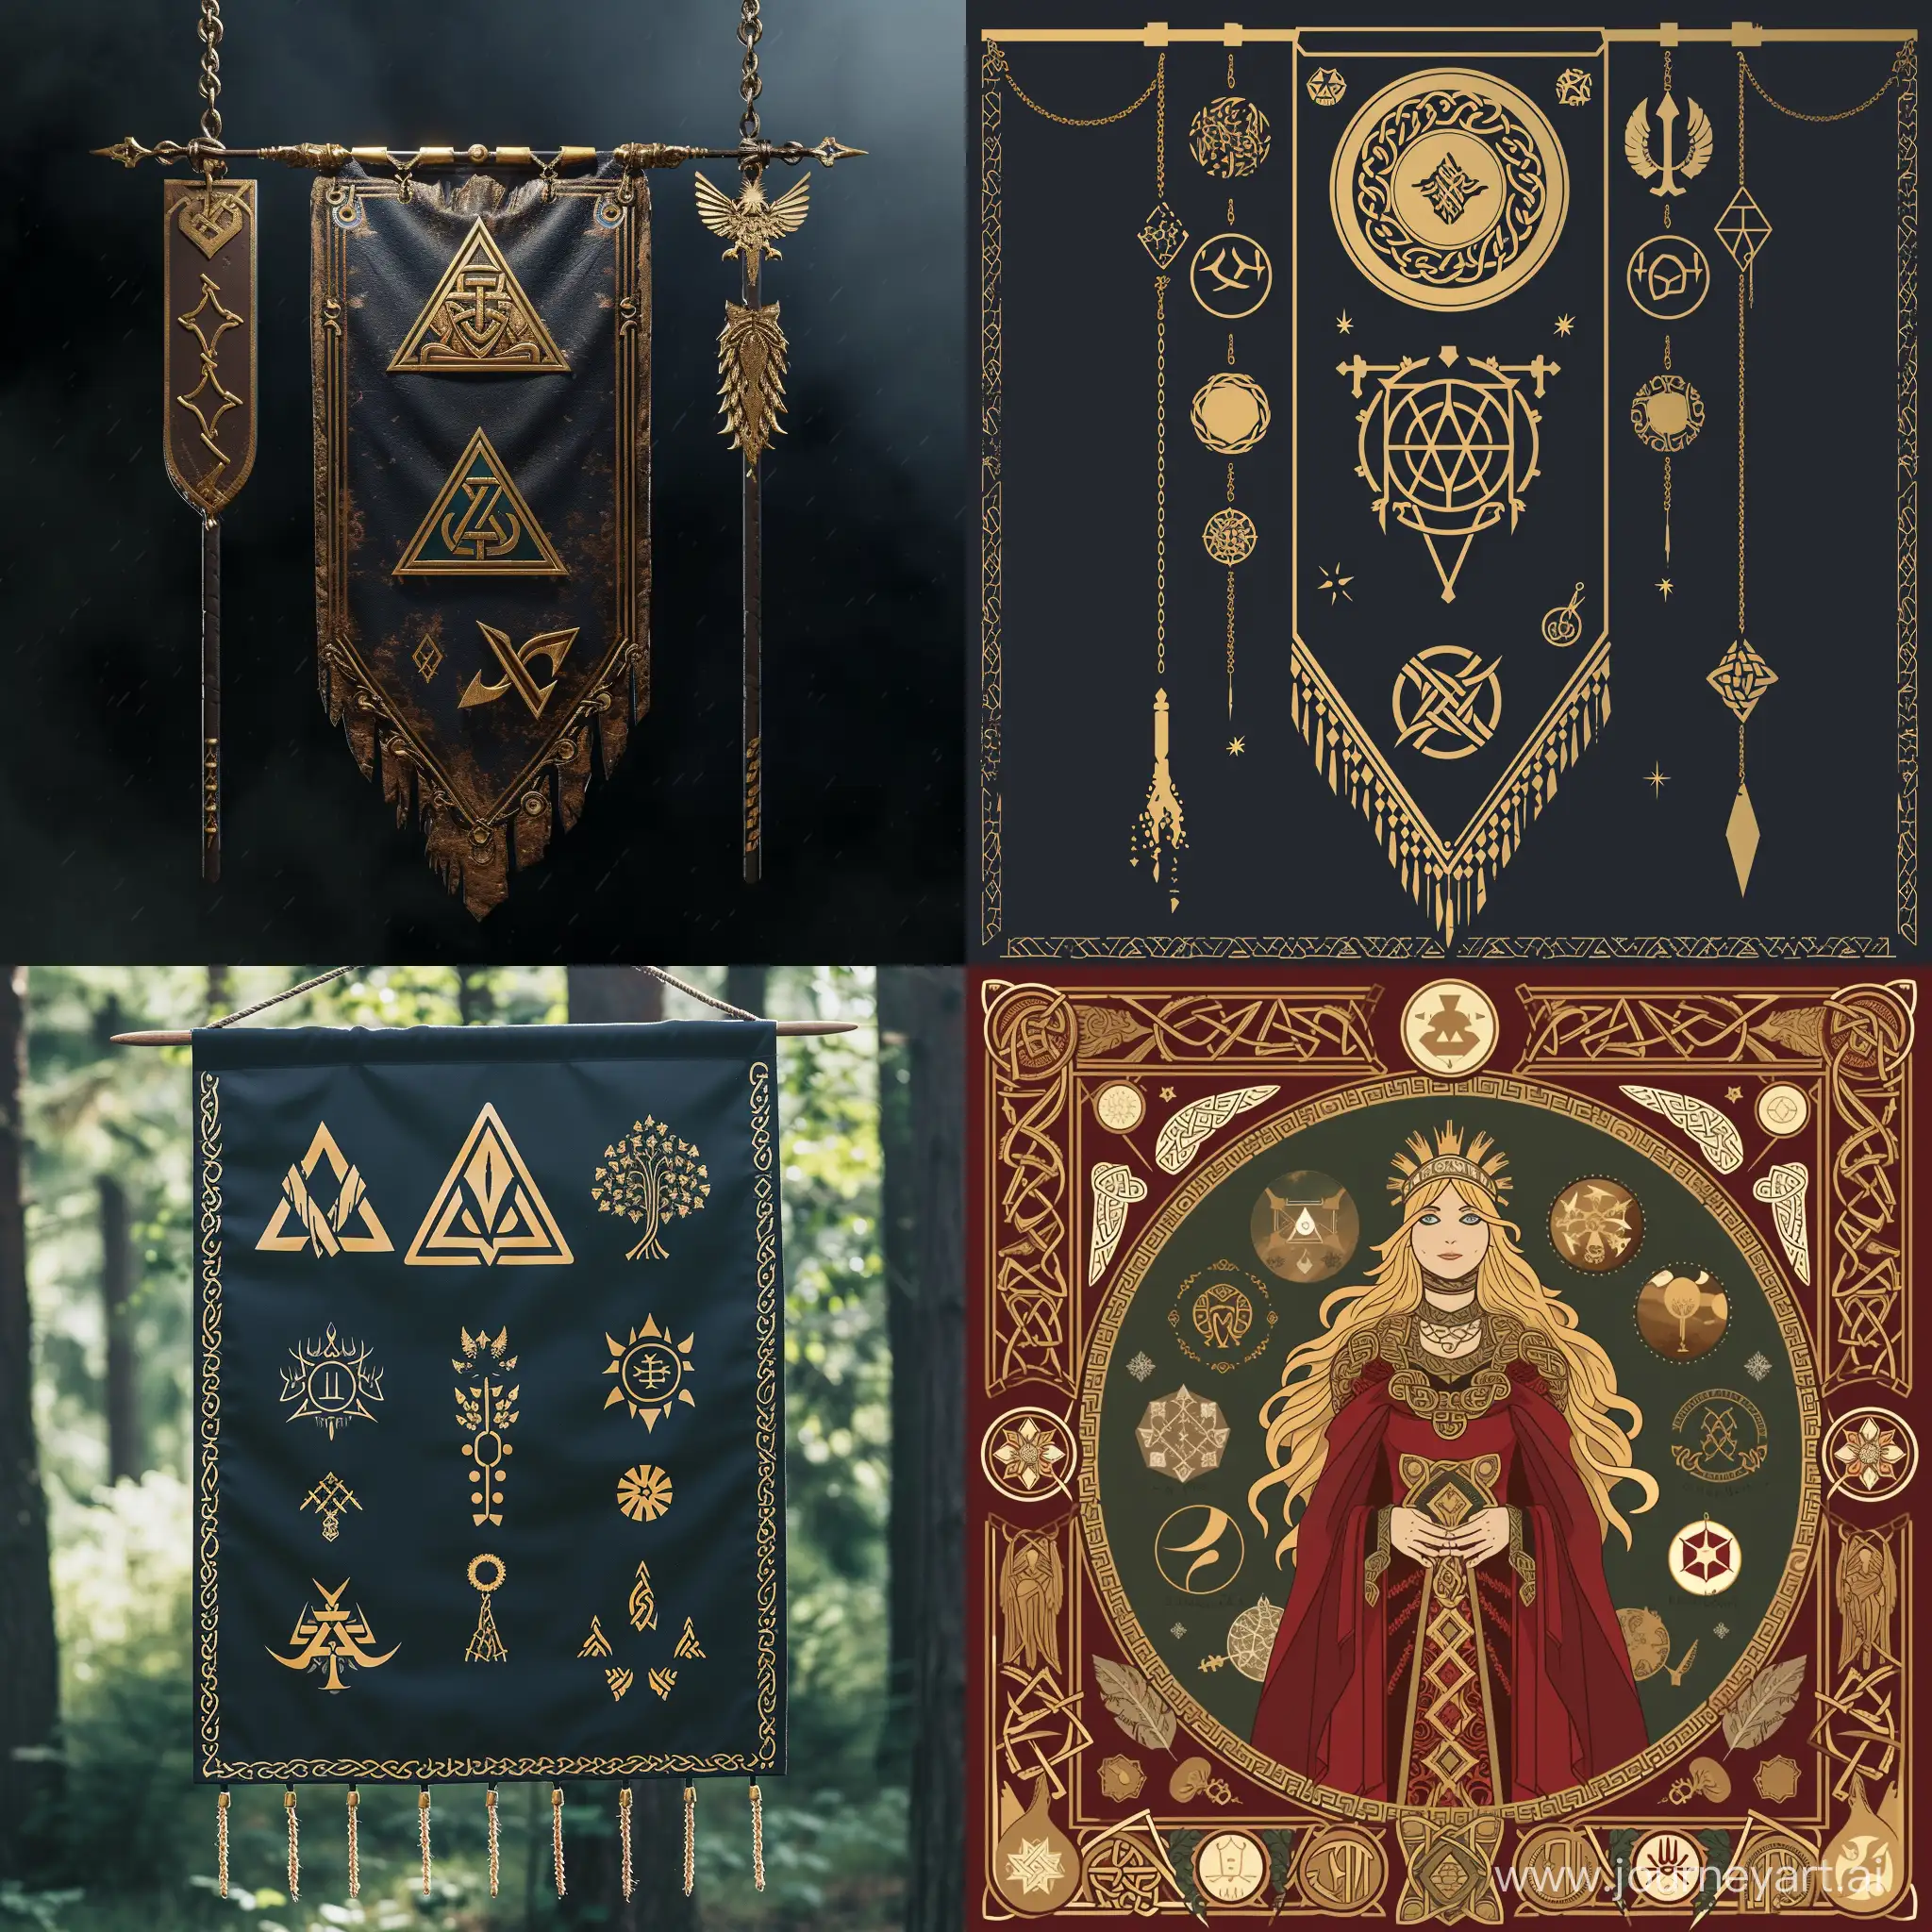 make a divine banner with symbols of beauty in the style of Valhalla